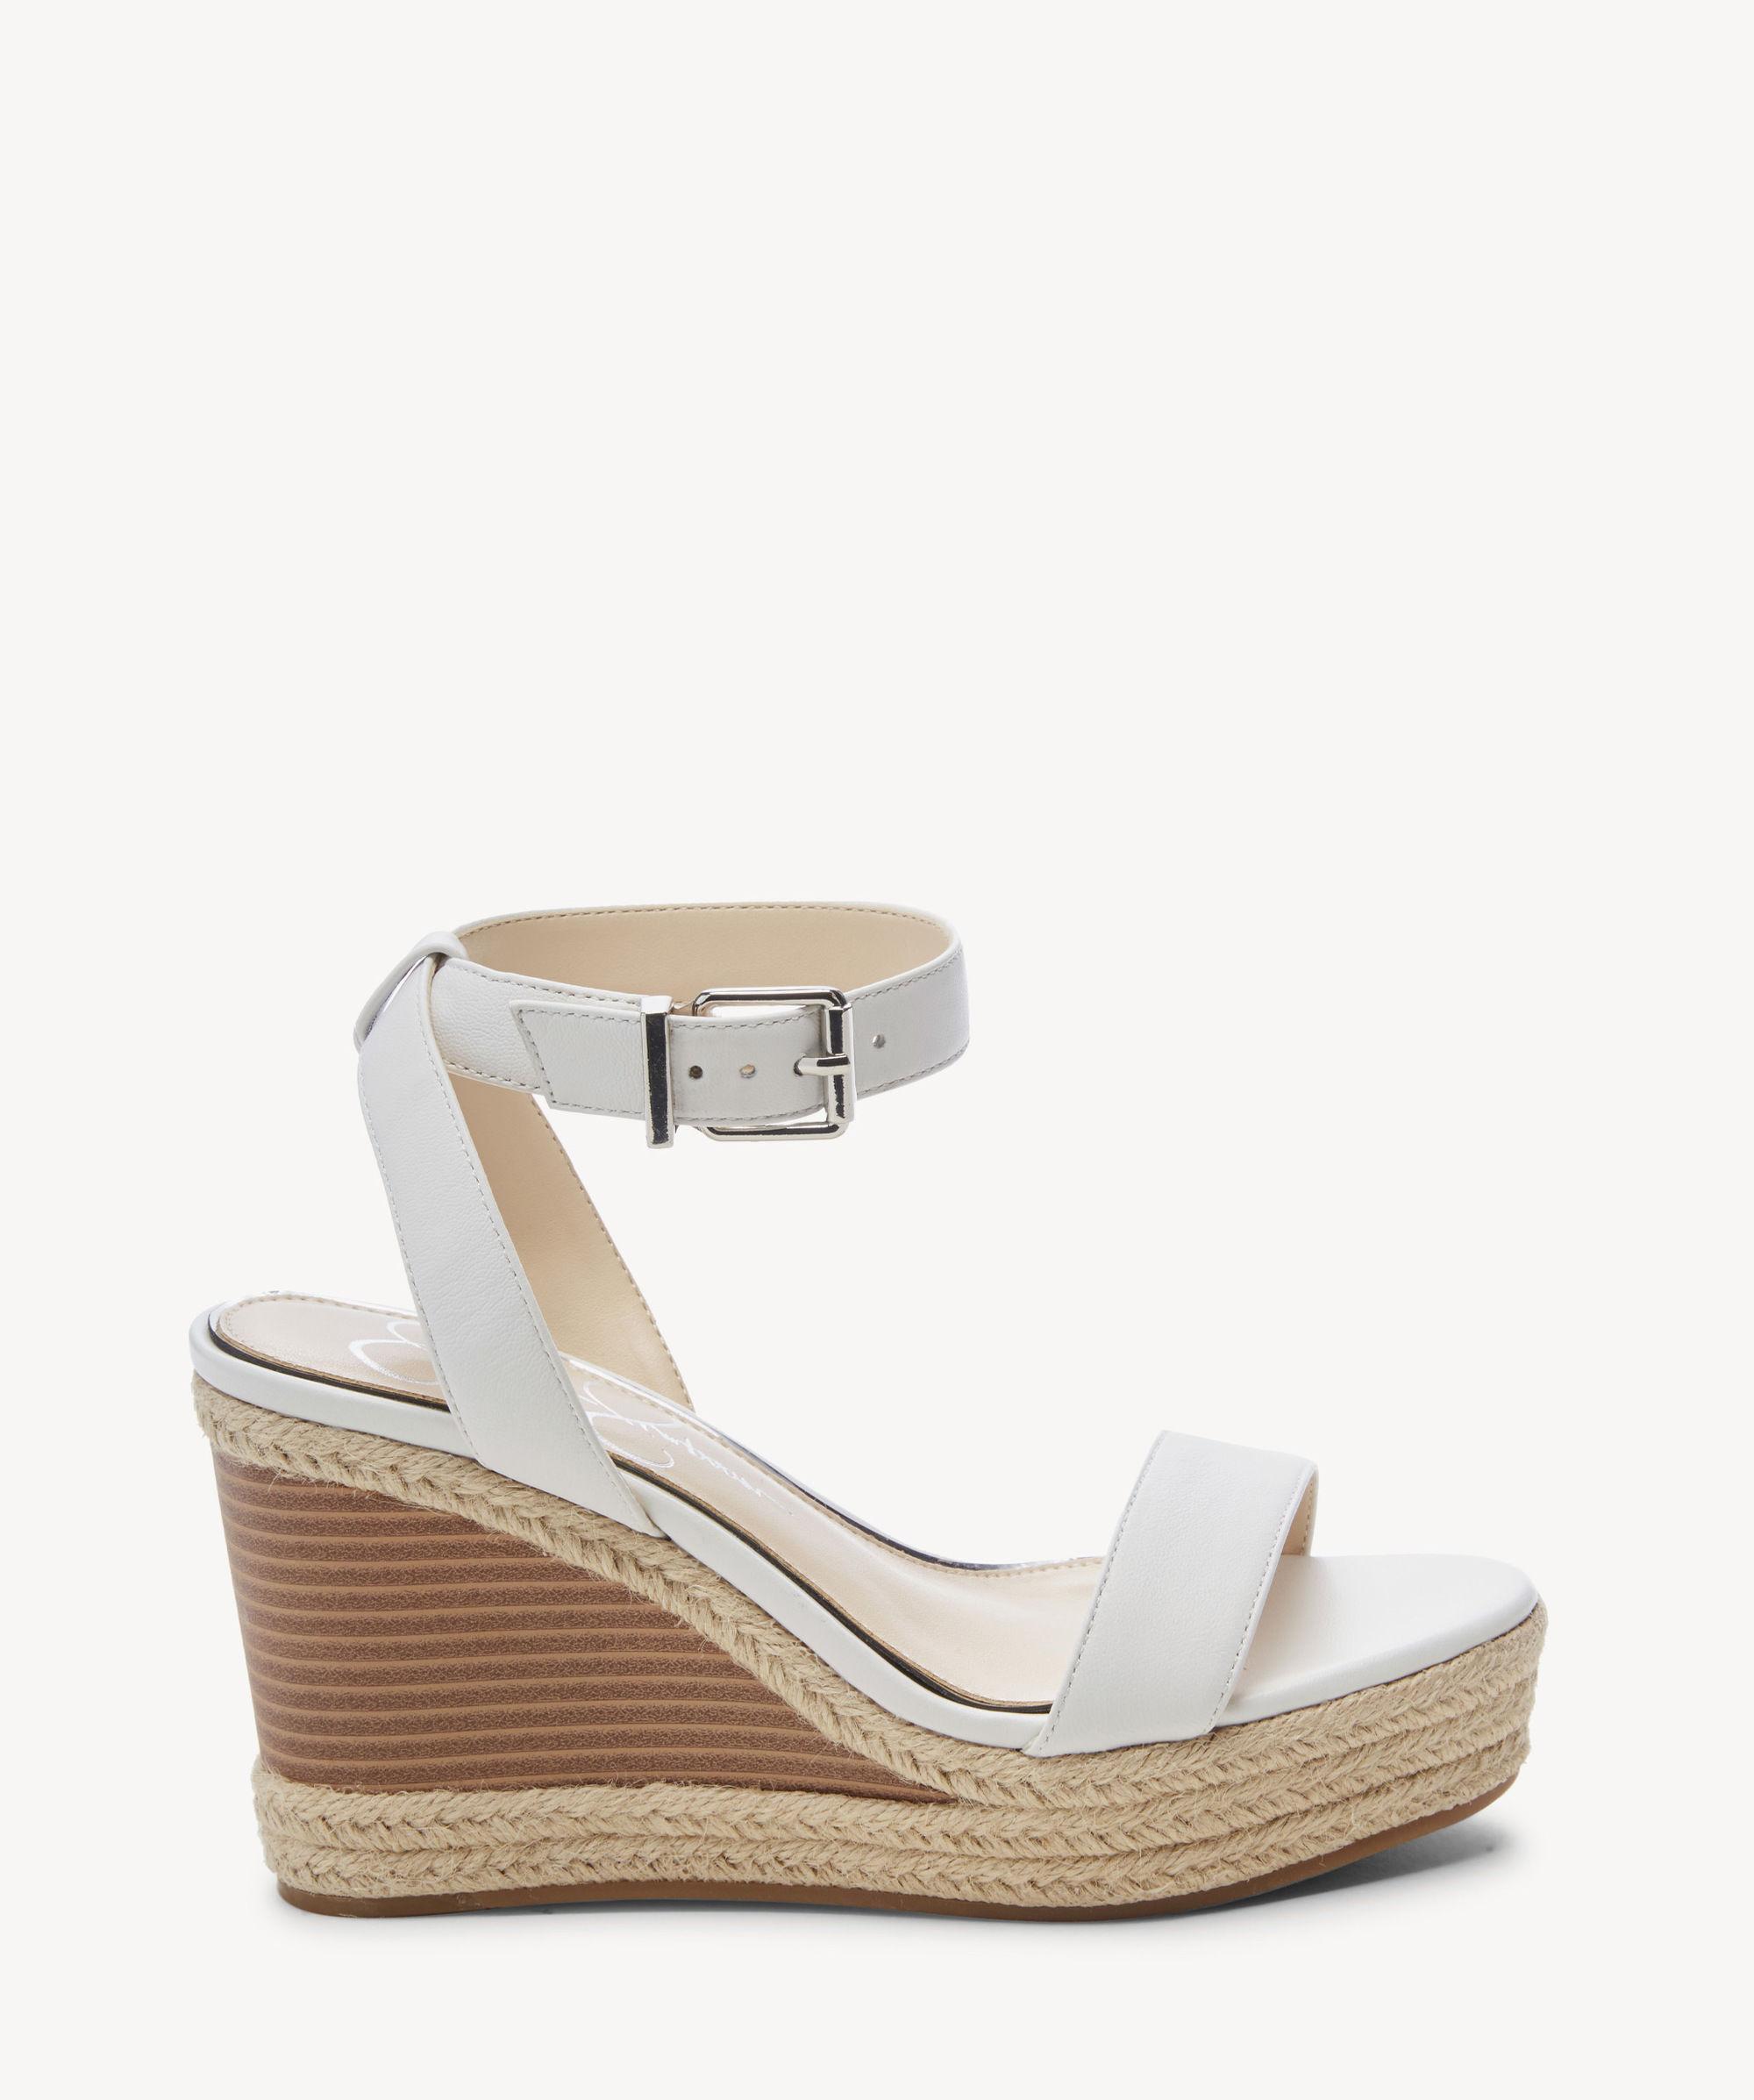 Jessica Simpson Leather Maylra Platform Wedge Sandal in Bright White ...